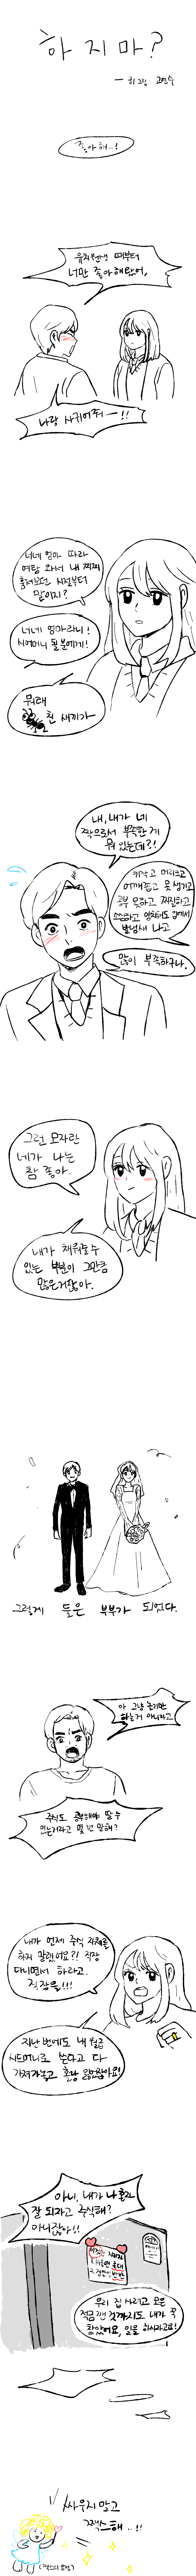 Don't get married.manhwa